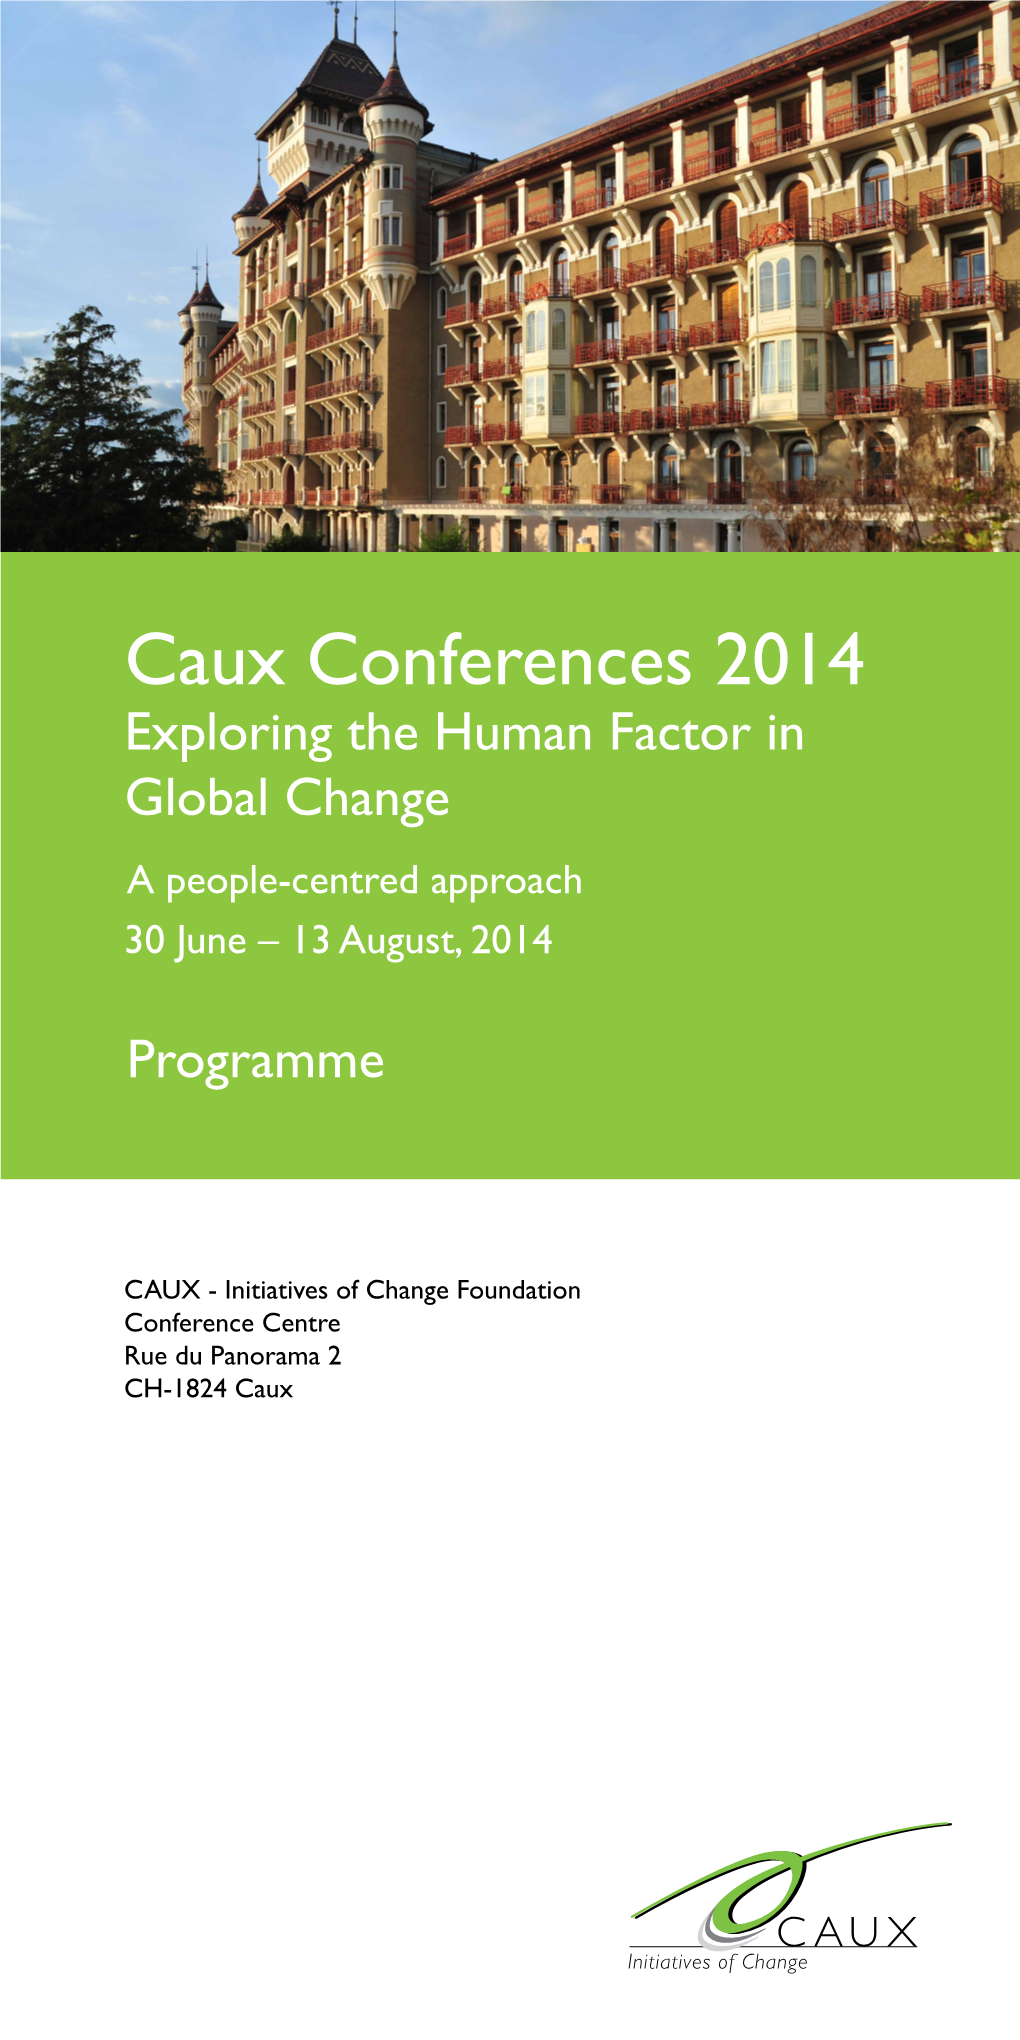 Caux Conferences 2014 Exploring the Human Factor in Global Change a People-Centred Approach 30 June – 13 August, 2014